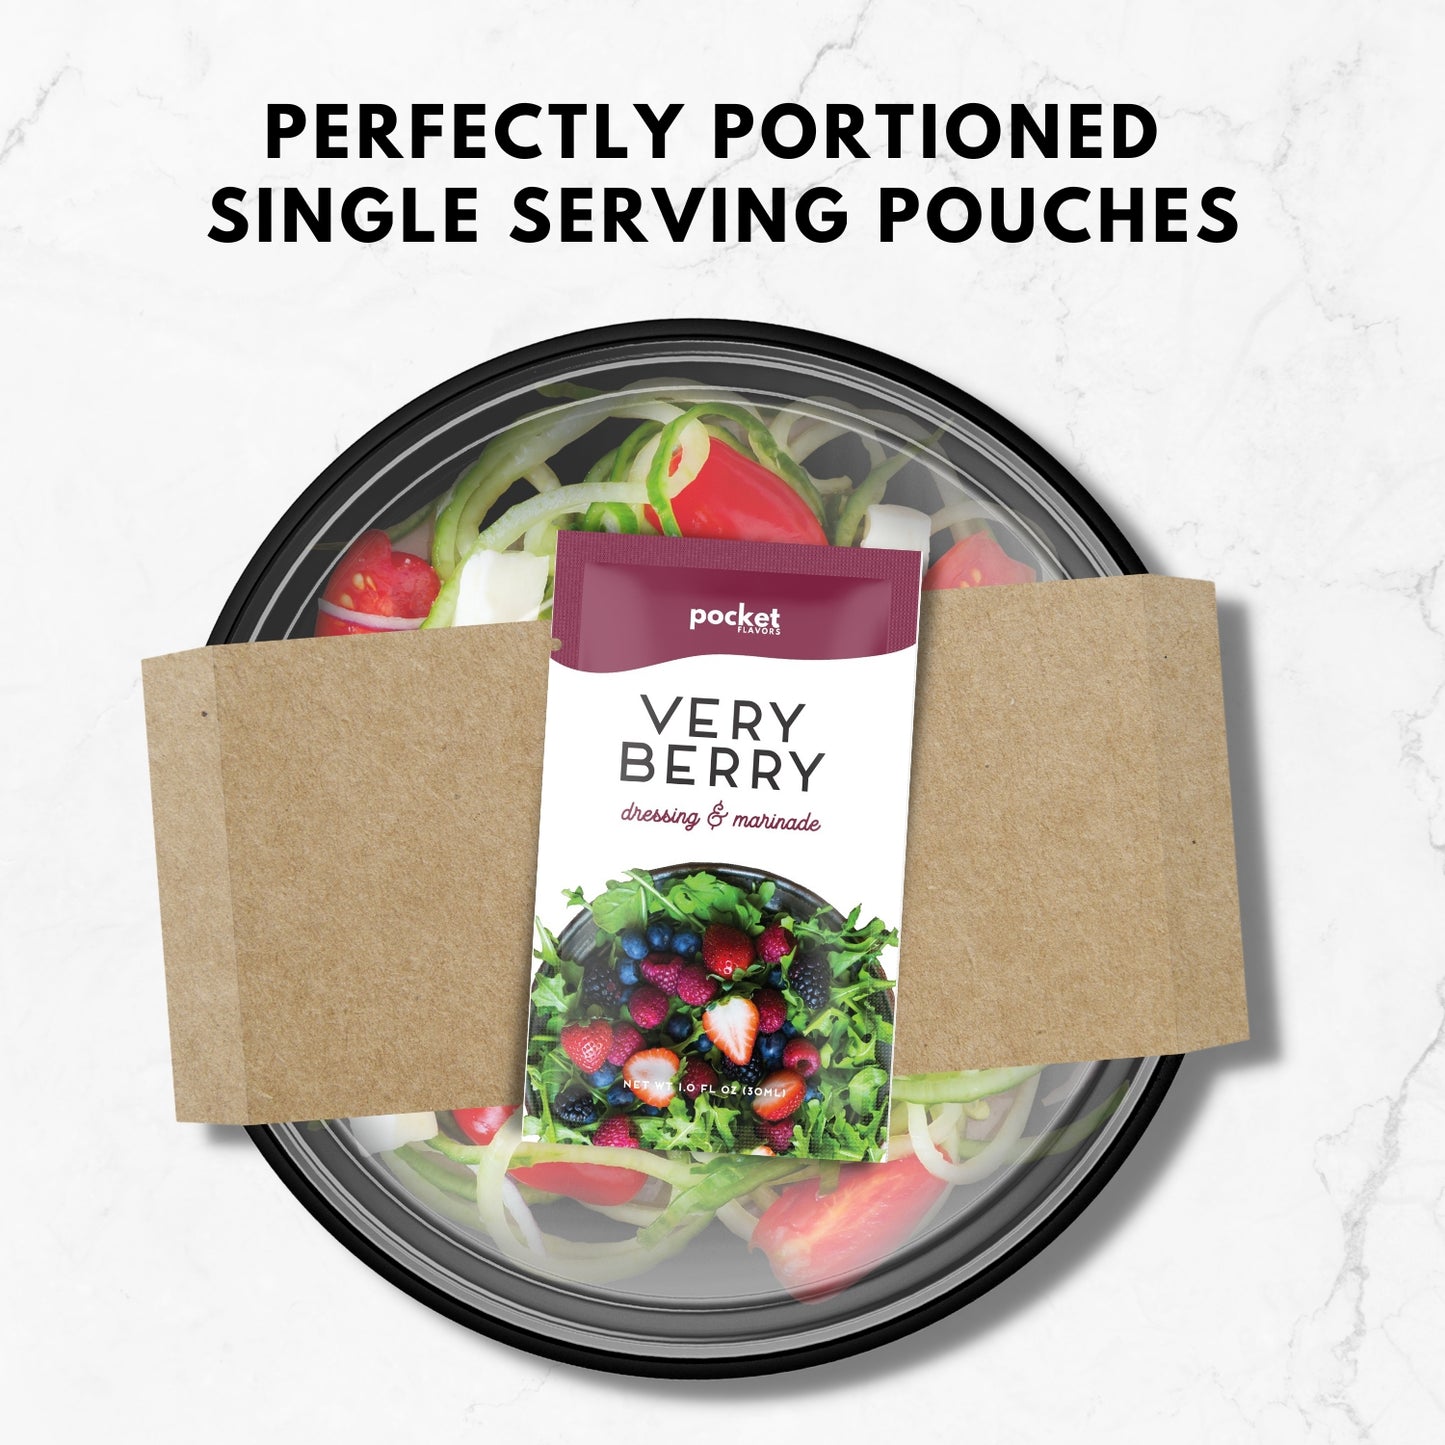 Very berry single serve salad dressing packet on top of a packaged salad.